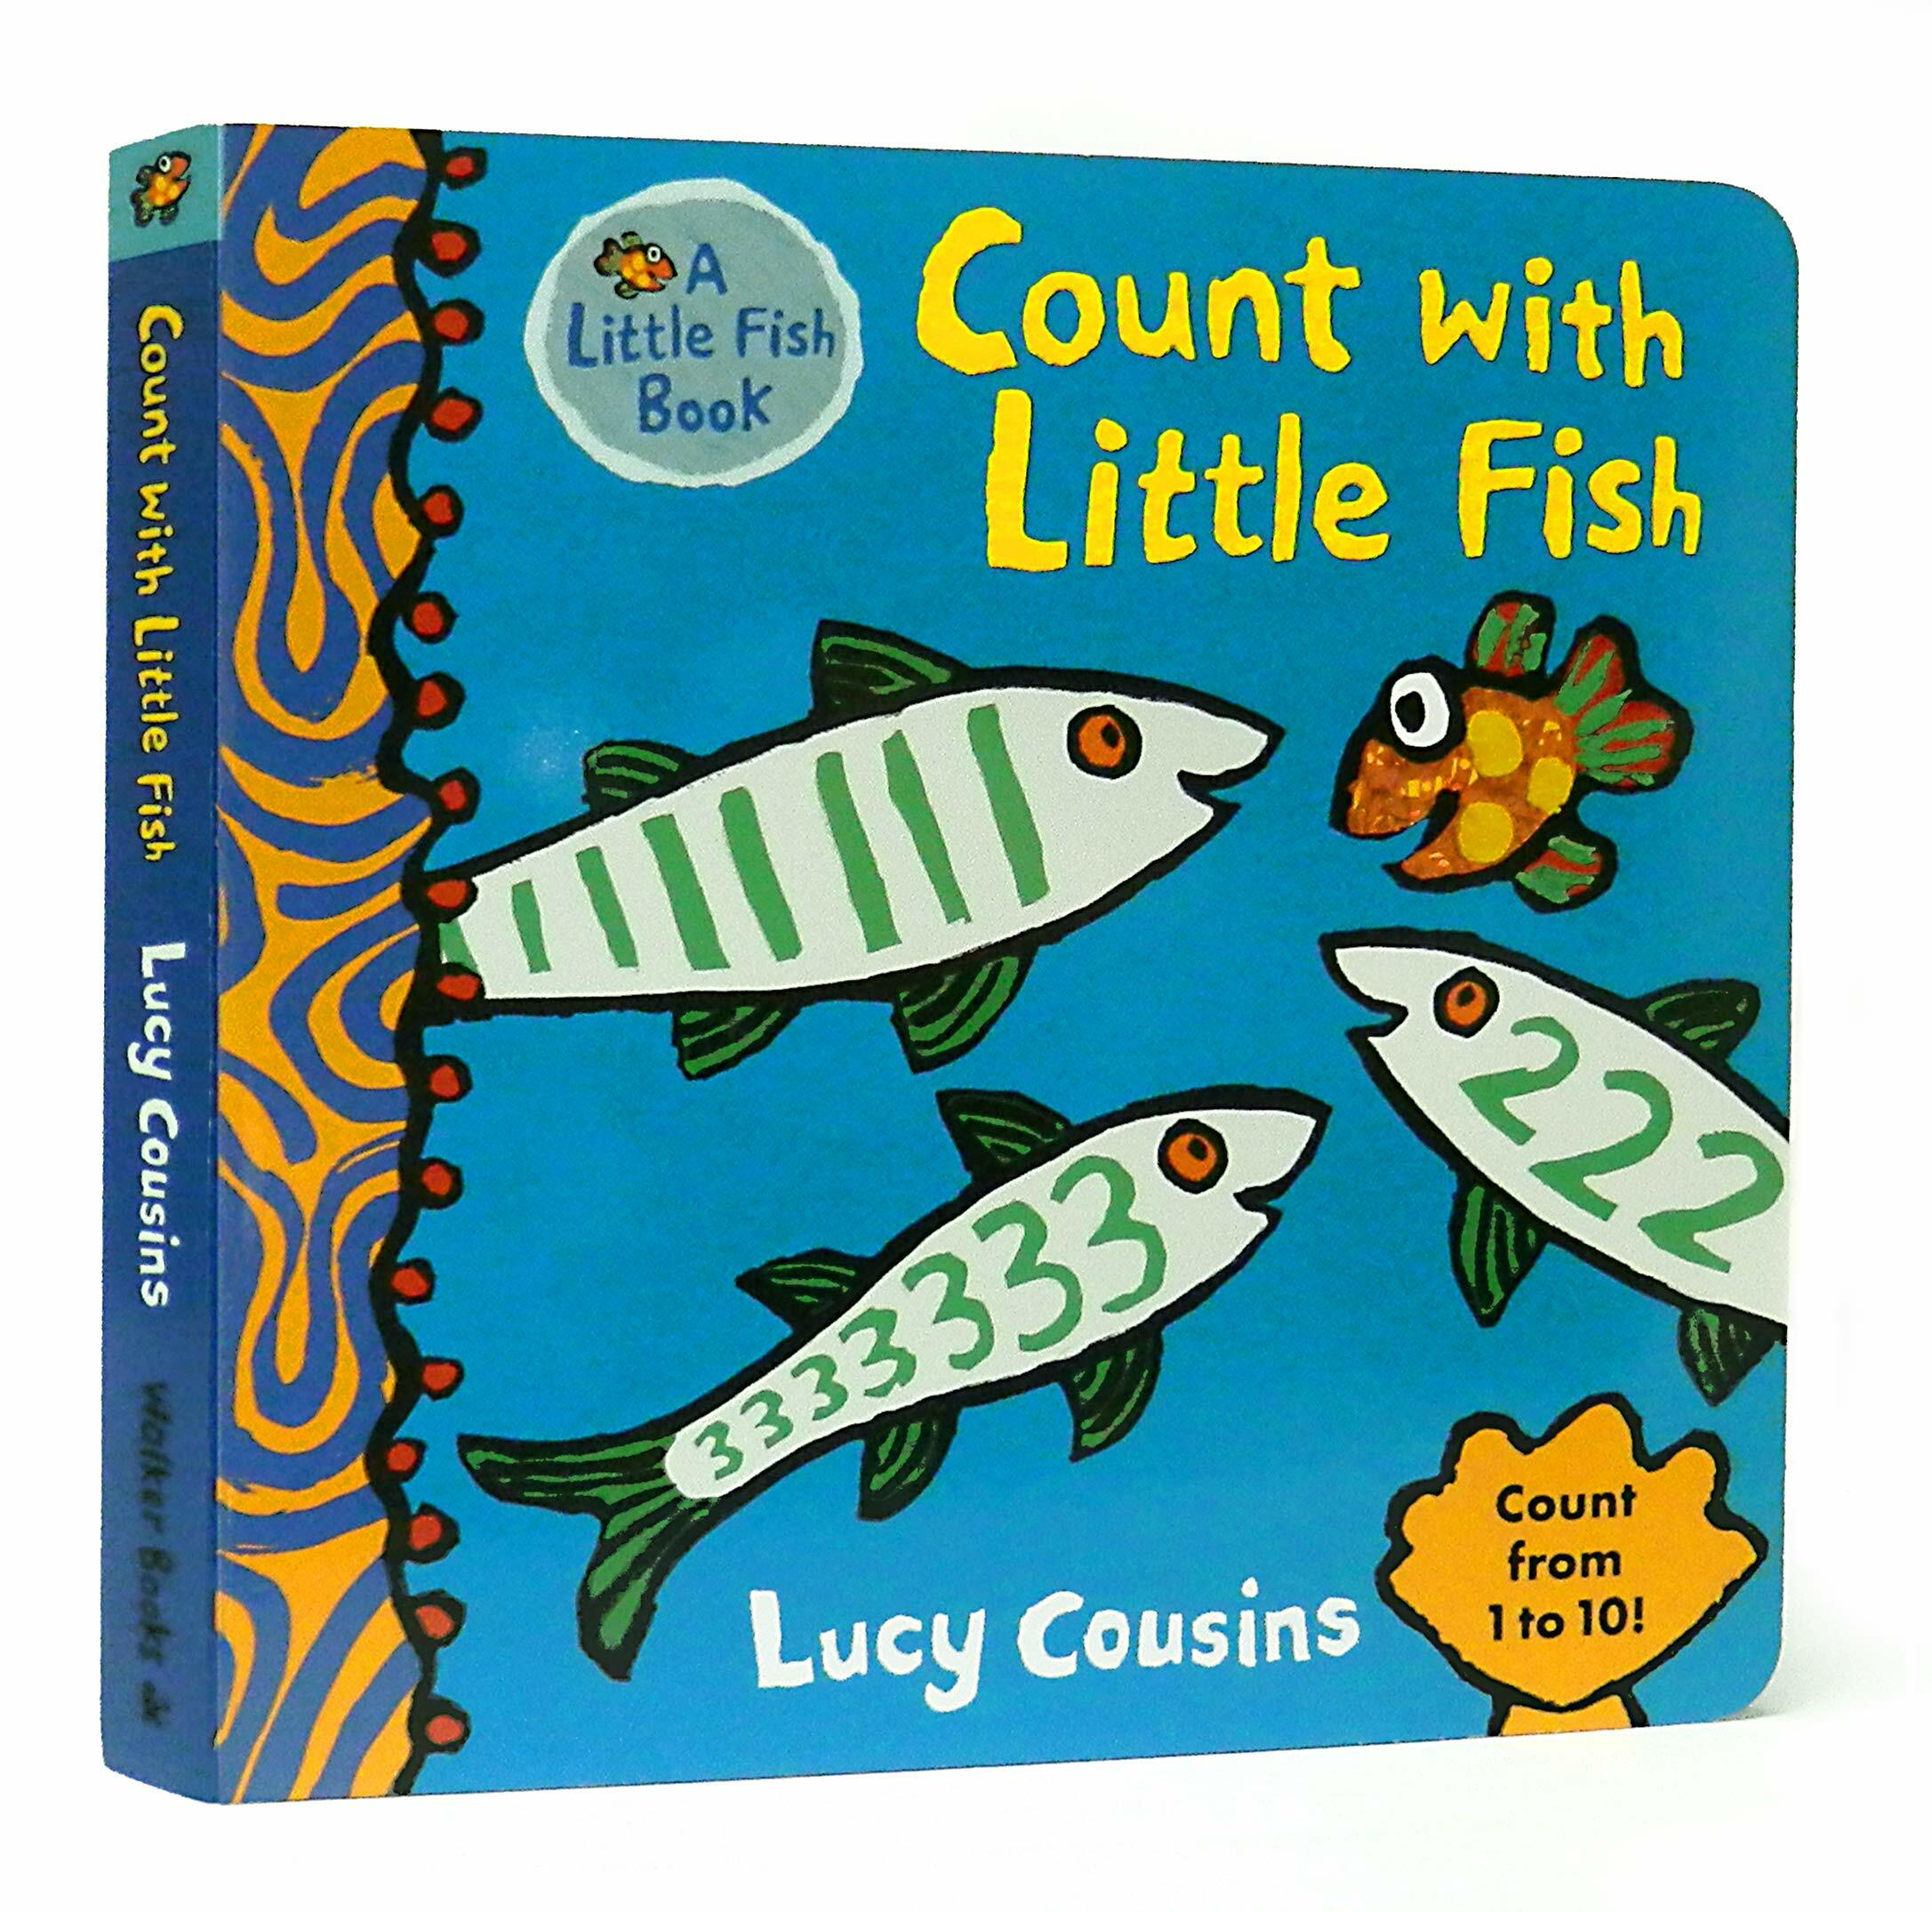 Count with Little Fish (Board Book)